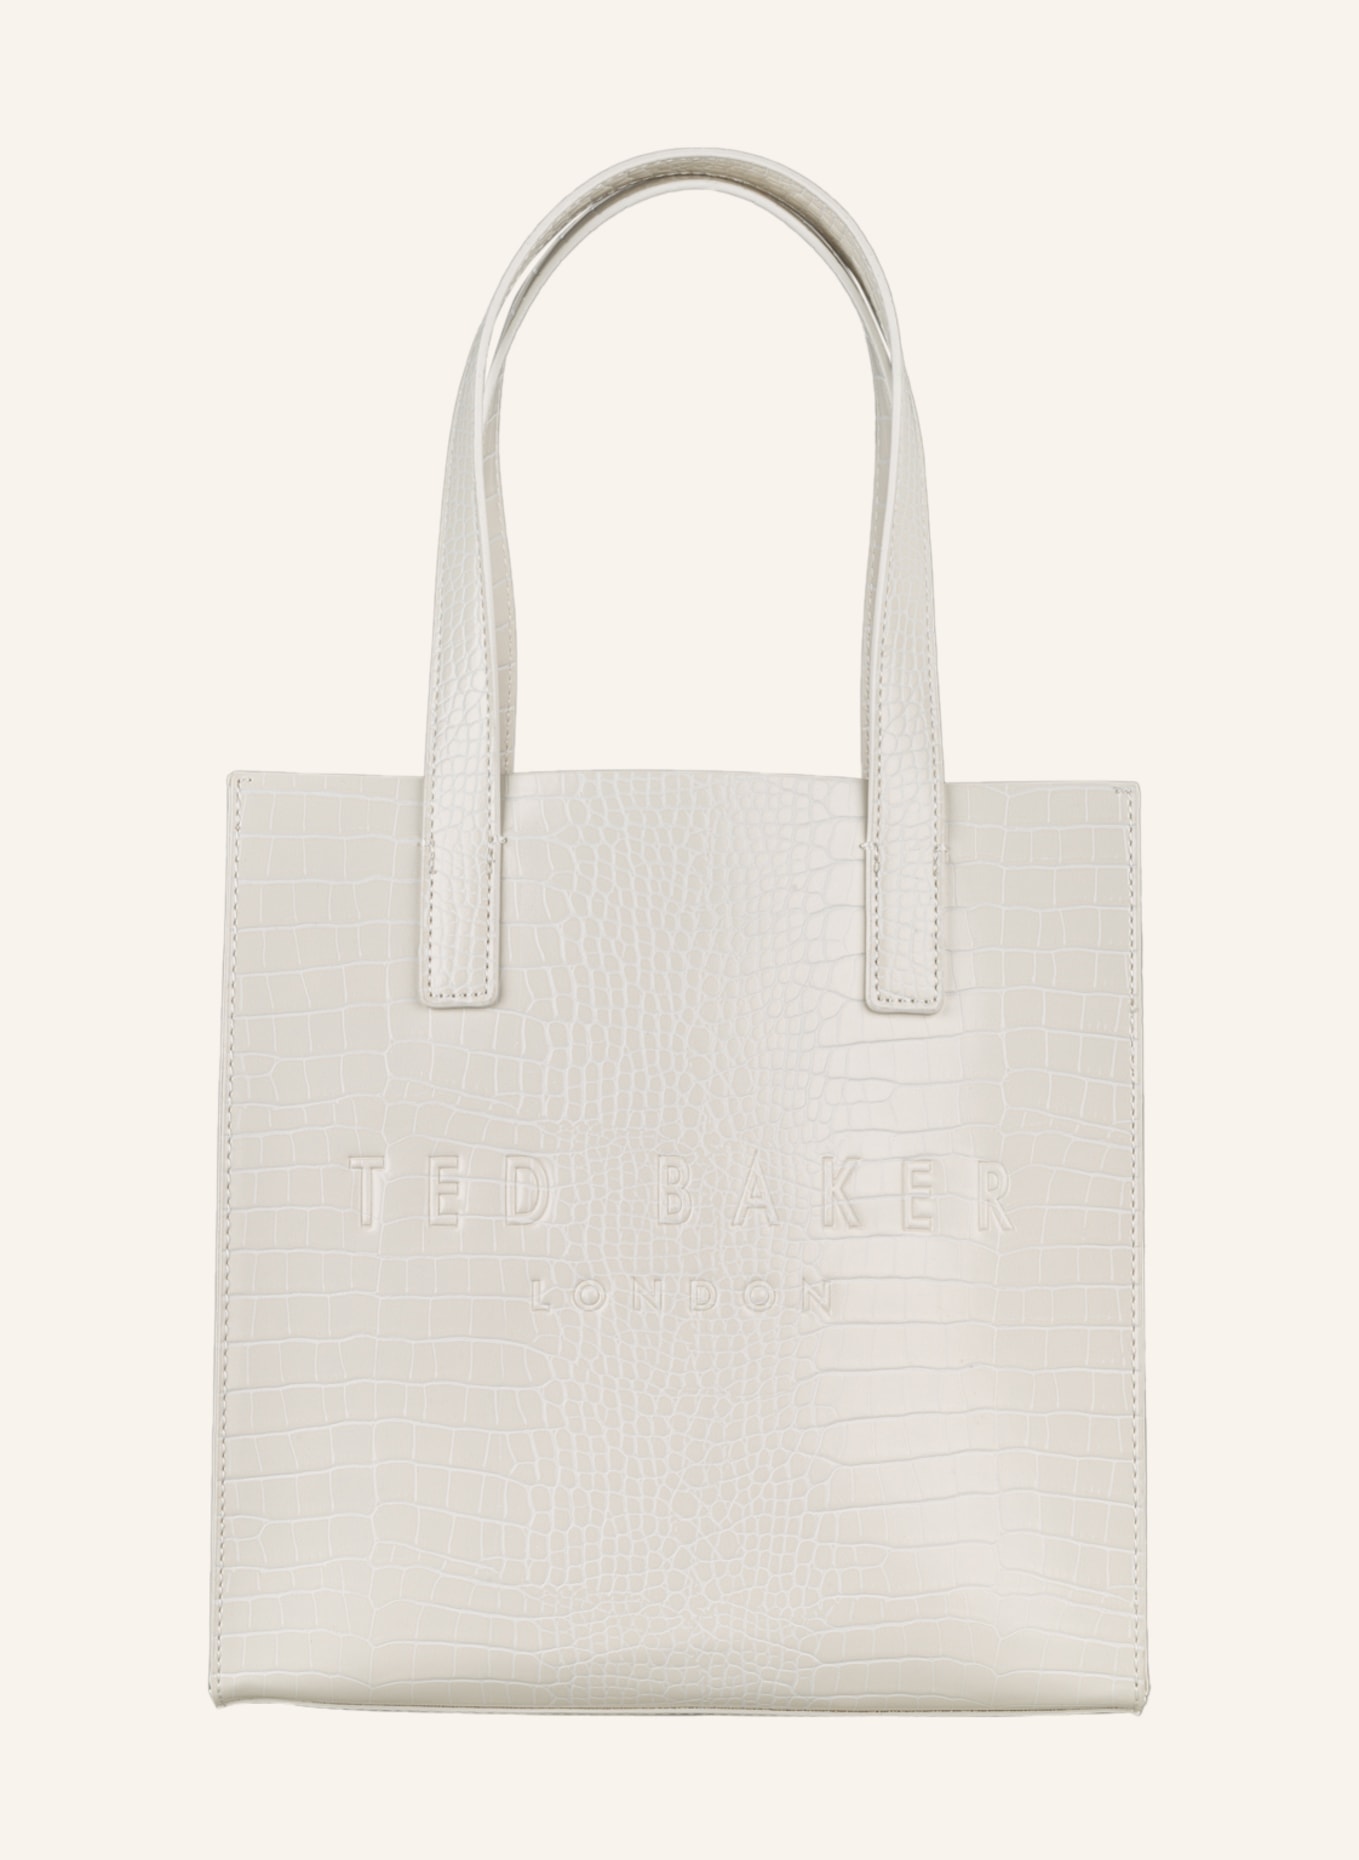 TED BAKER Handtasche REPTCON ICON SMALL, Farbe: WEISS(Bild null)